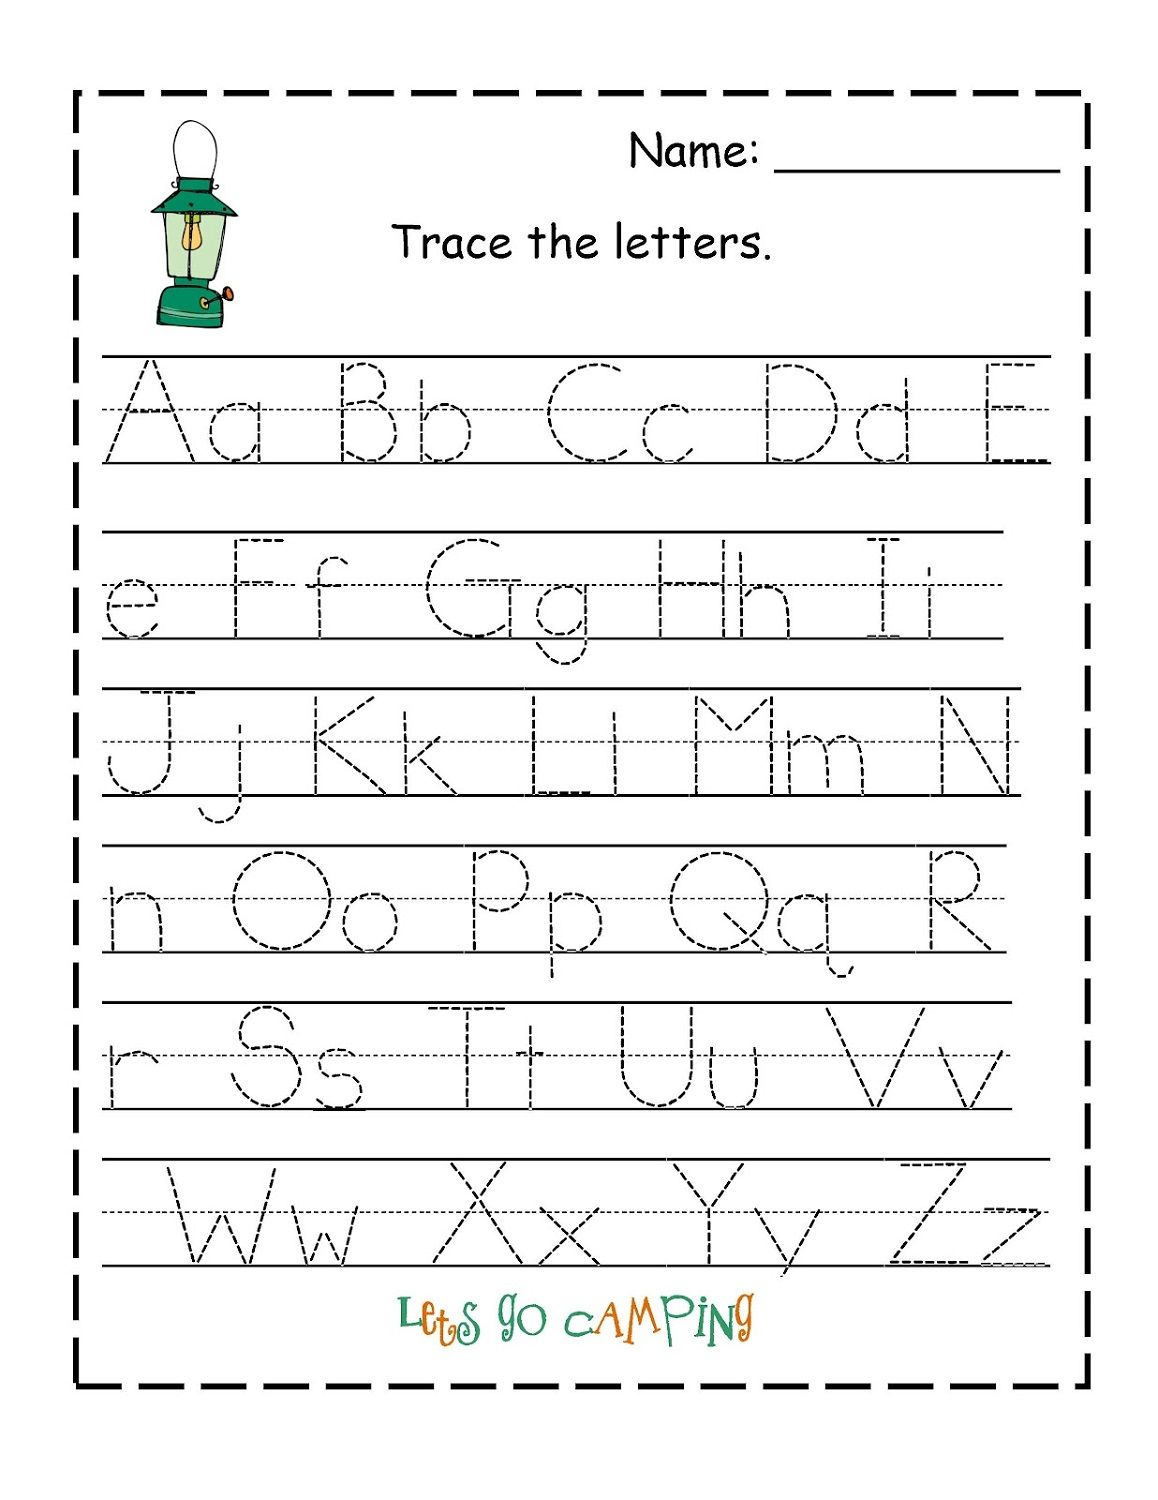 Traceable Alphabet Worksheets A-Z | Alphabet Tracing with Free Tracing Letters Worksheet A-Z